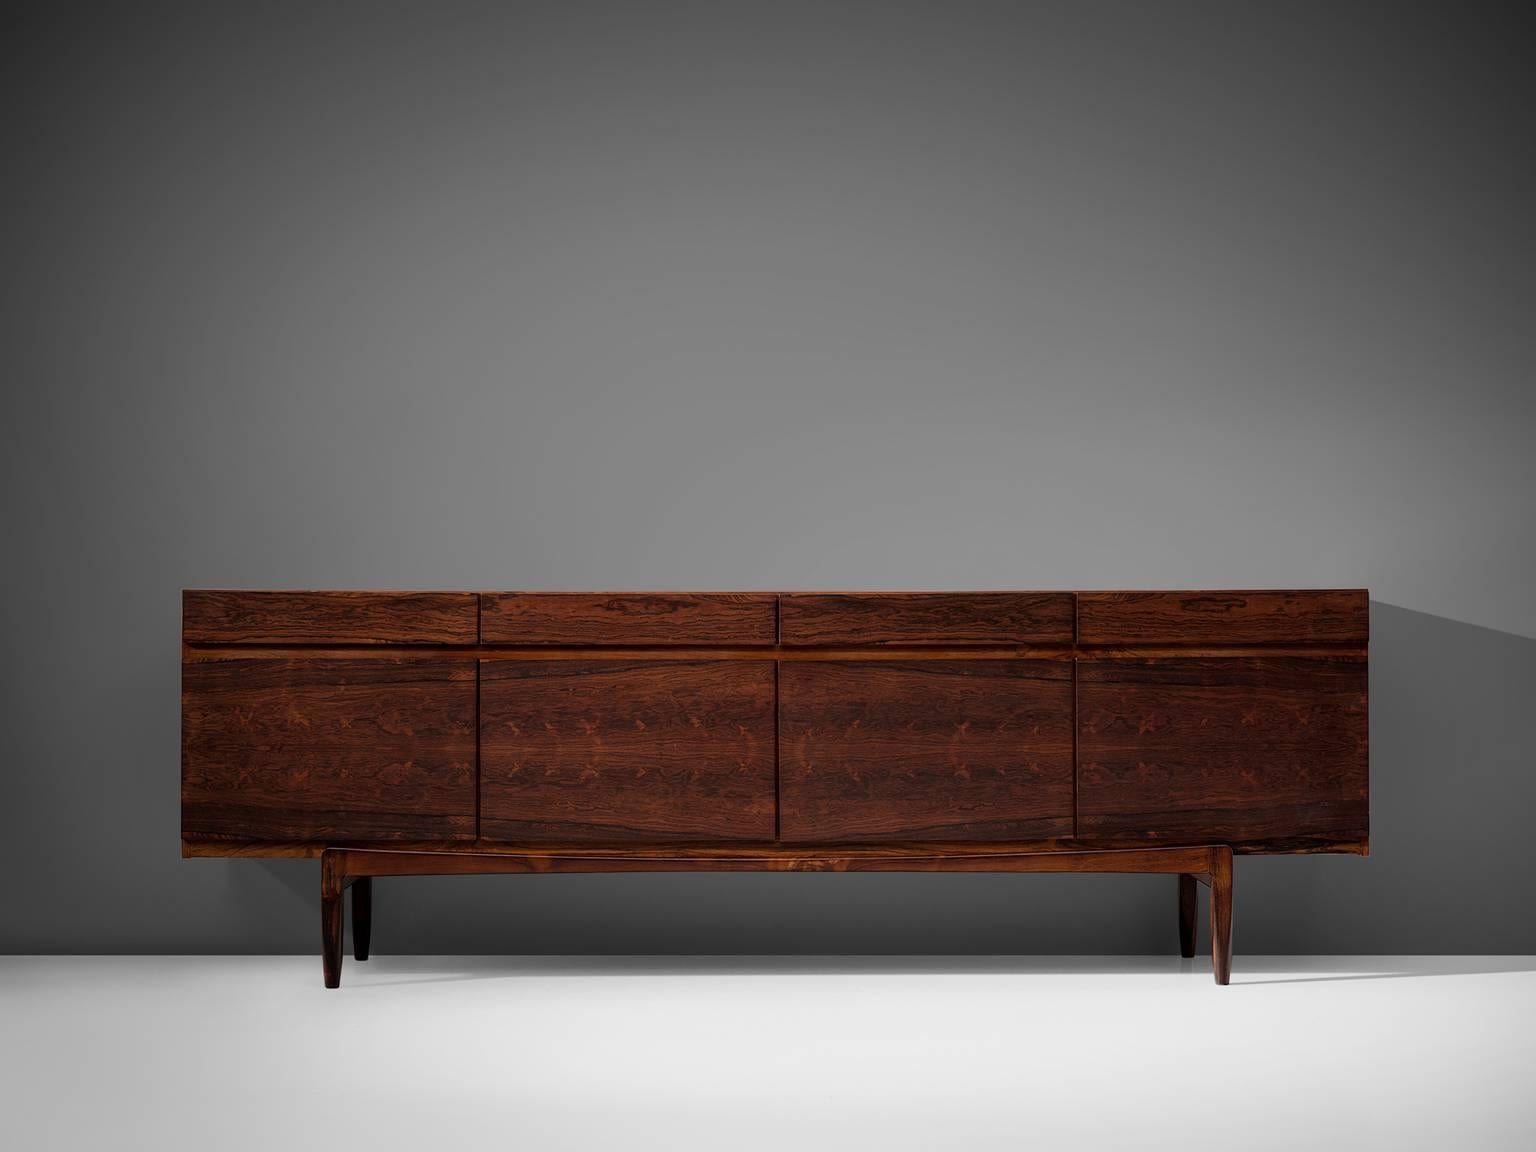 Scandinavian Modern Early Refinished Ib Kofod-Larsen Bookmatched Credenza in Rosewood